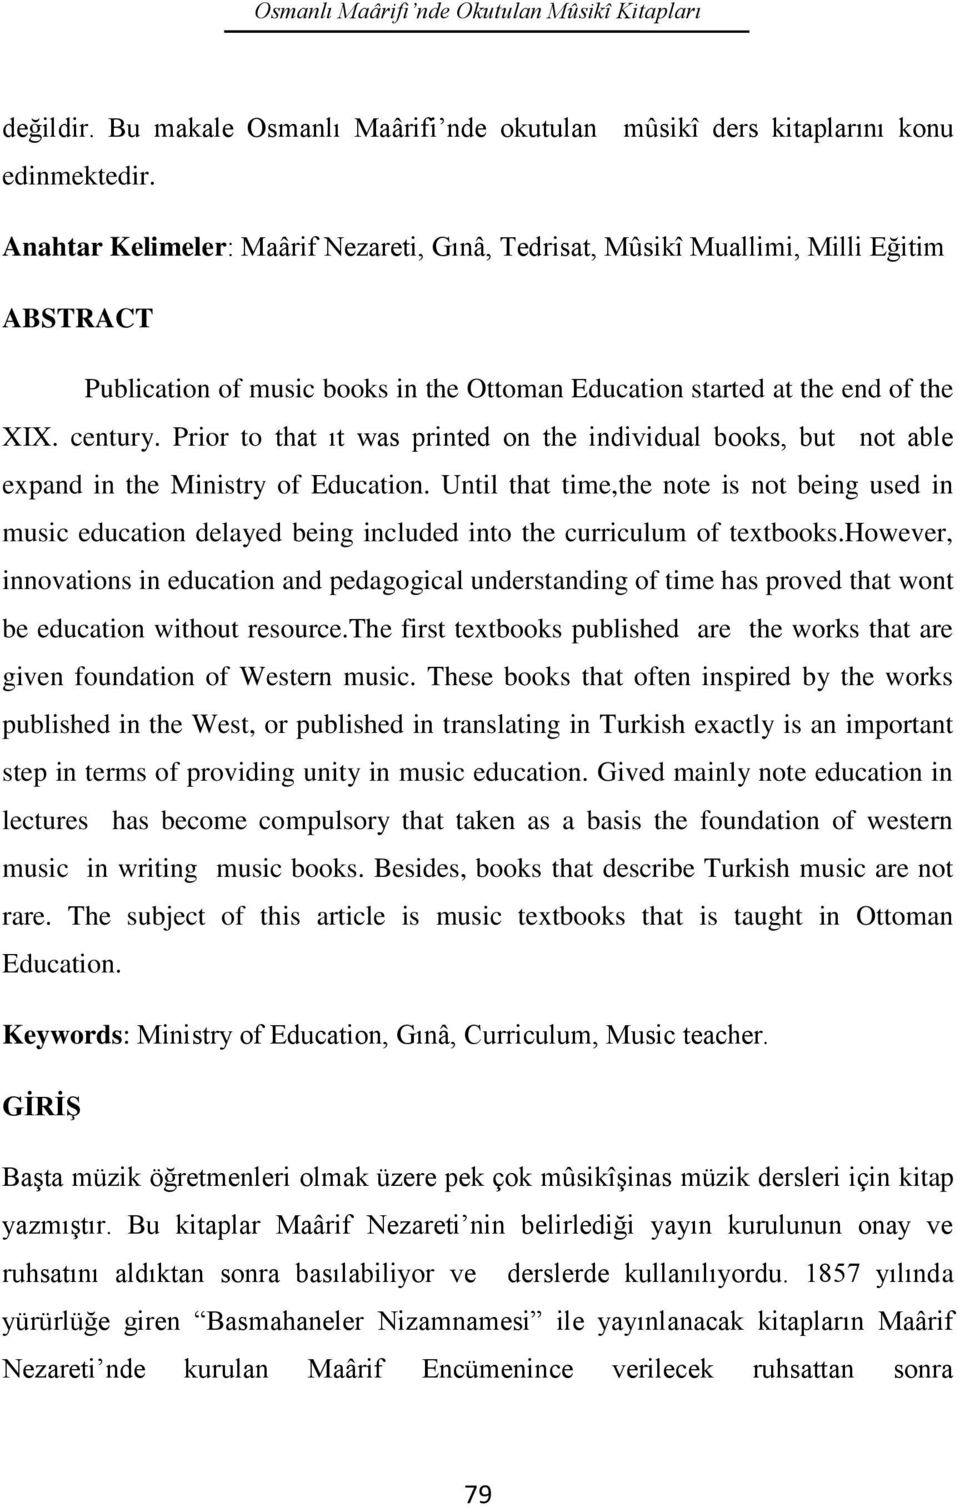 Prior to that ıt was printed on the individual books, but not able expand in the Ministry of Education.